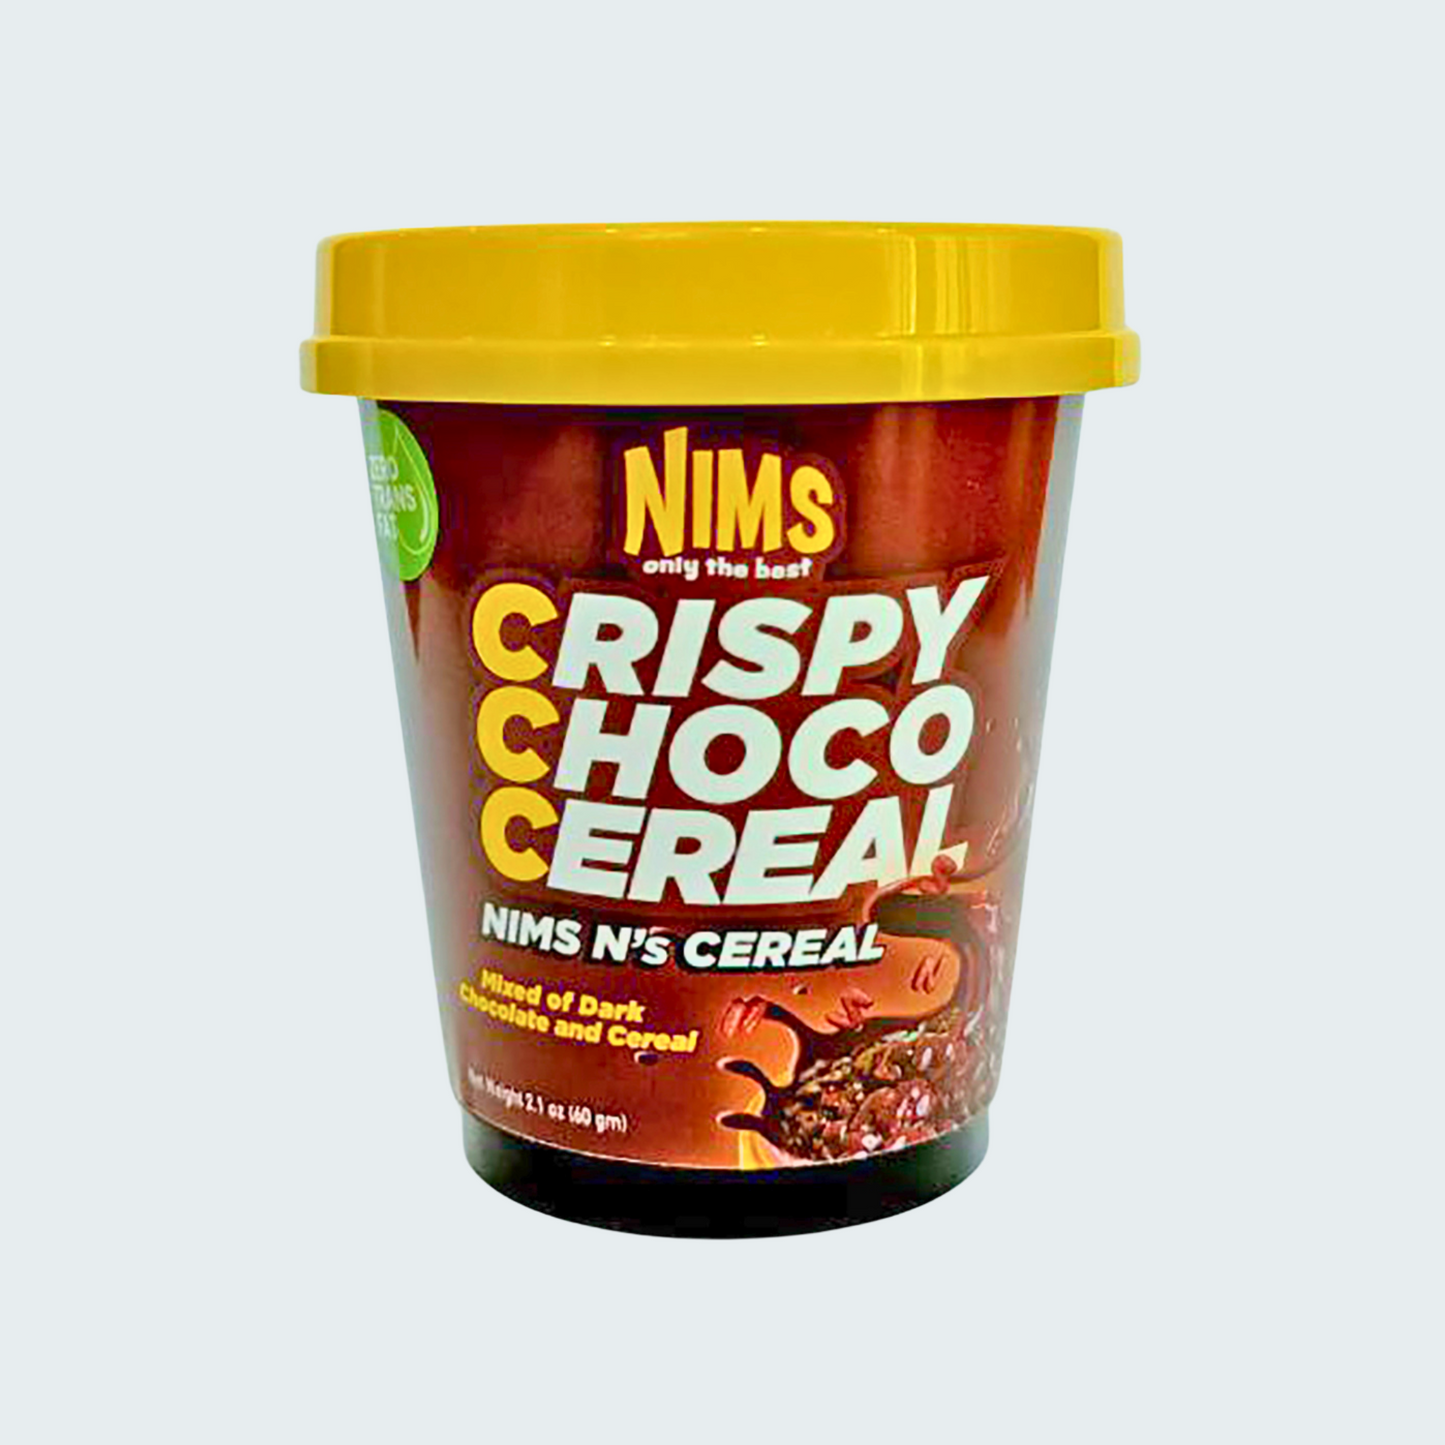 NIMS Crispy Choco Cereal, Mixed of Dark Chocolate and Cereal, Ready to Eat, 2.1 oz (60 gm), a pack of 12